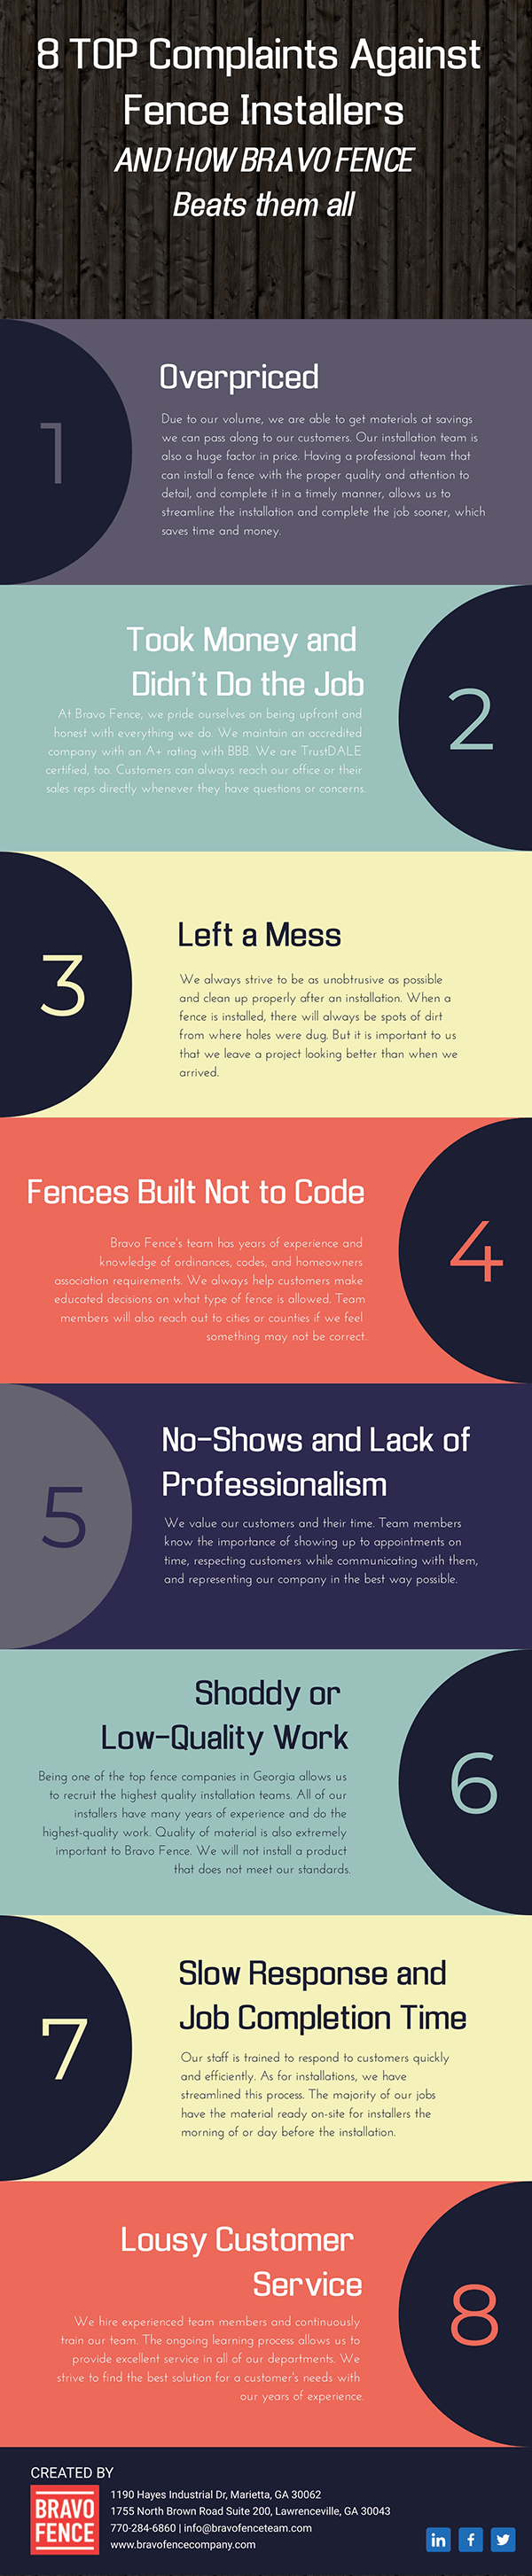 Disrupting-the-Industry-Top-Complaints-Against-Fence-Installers-infographic